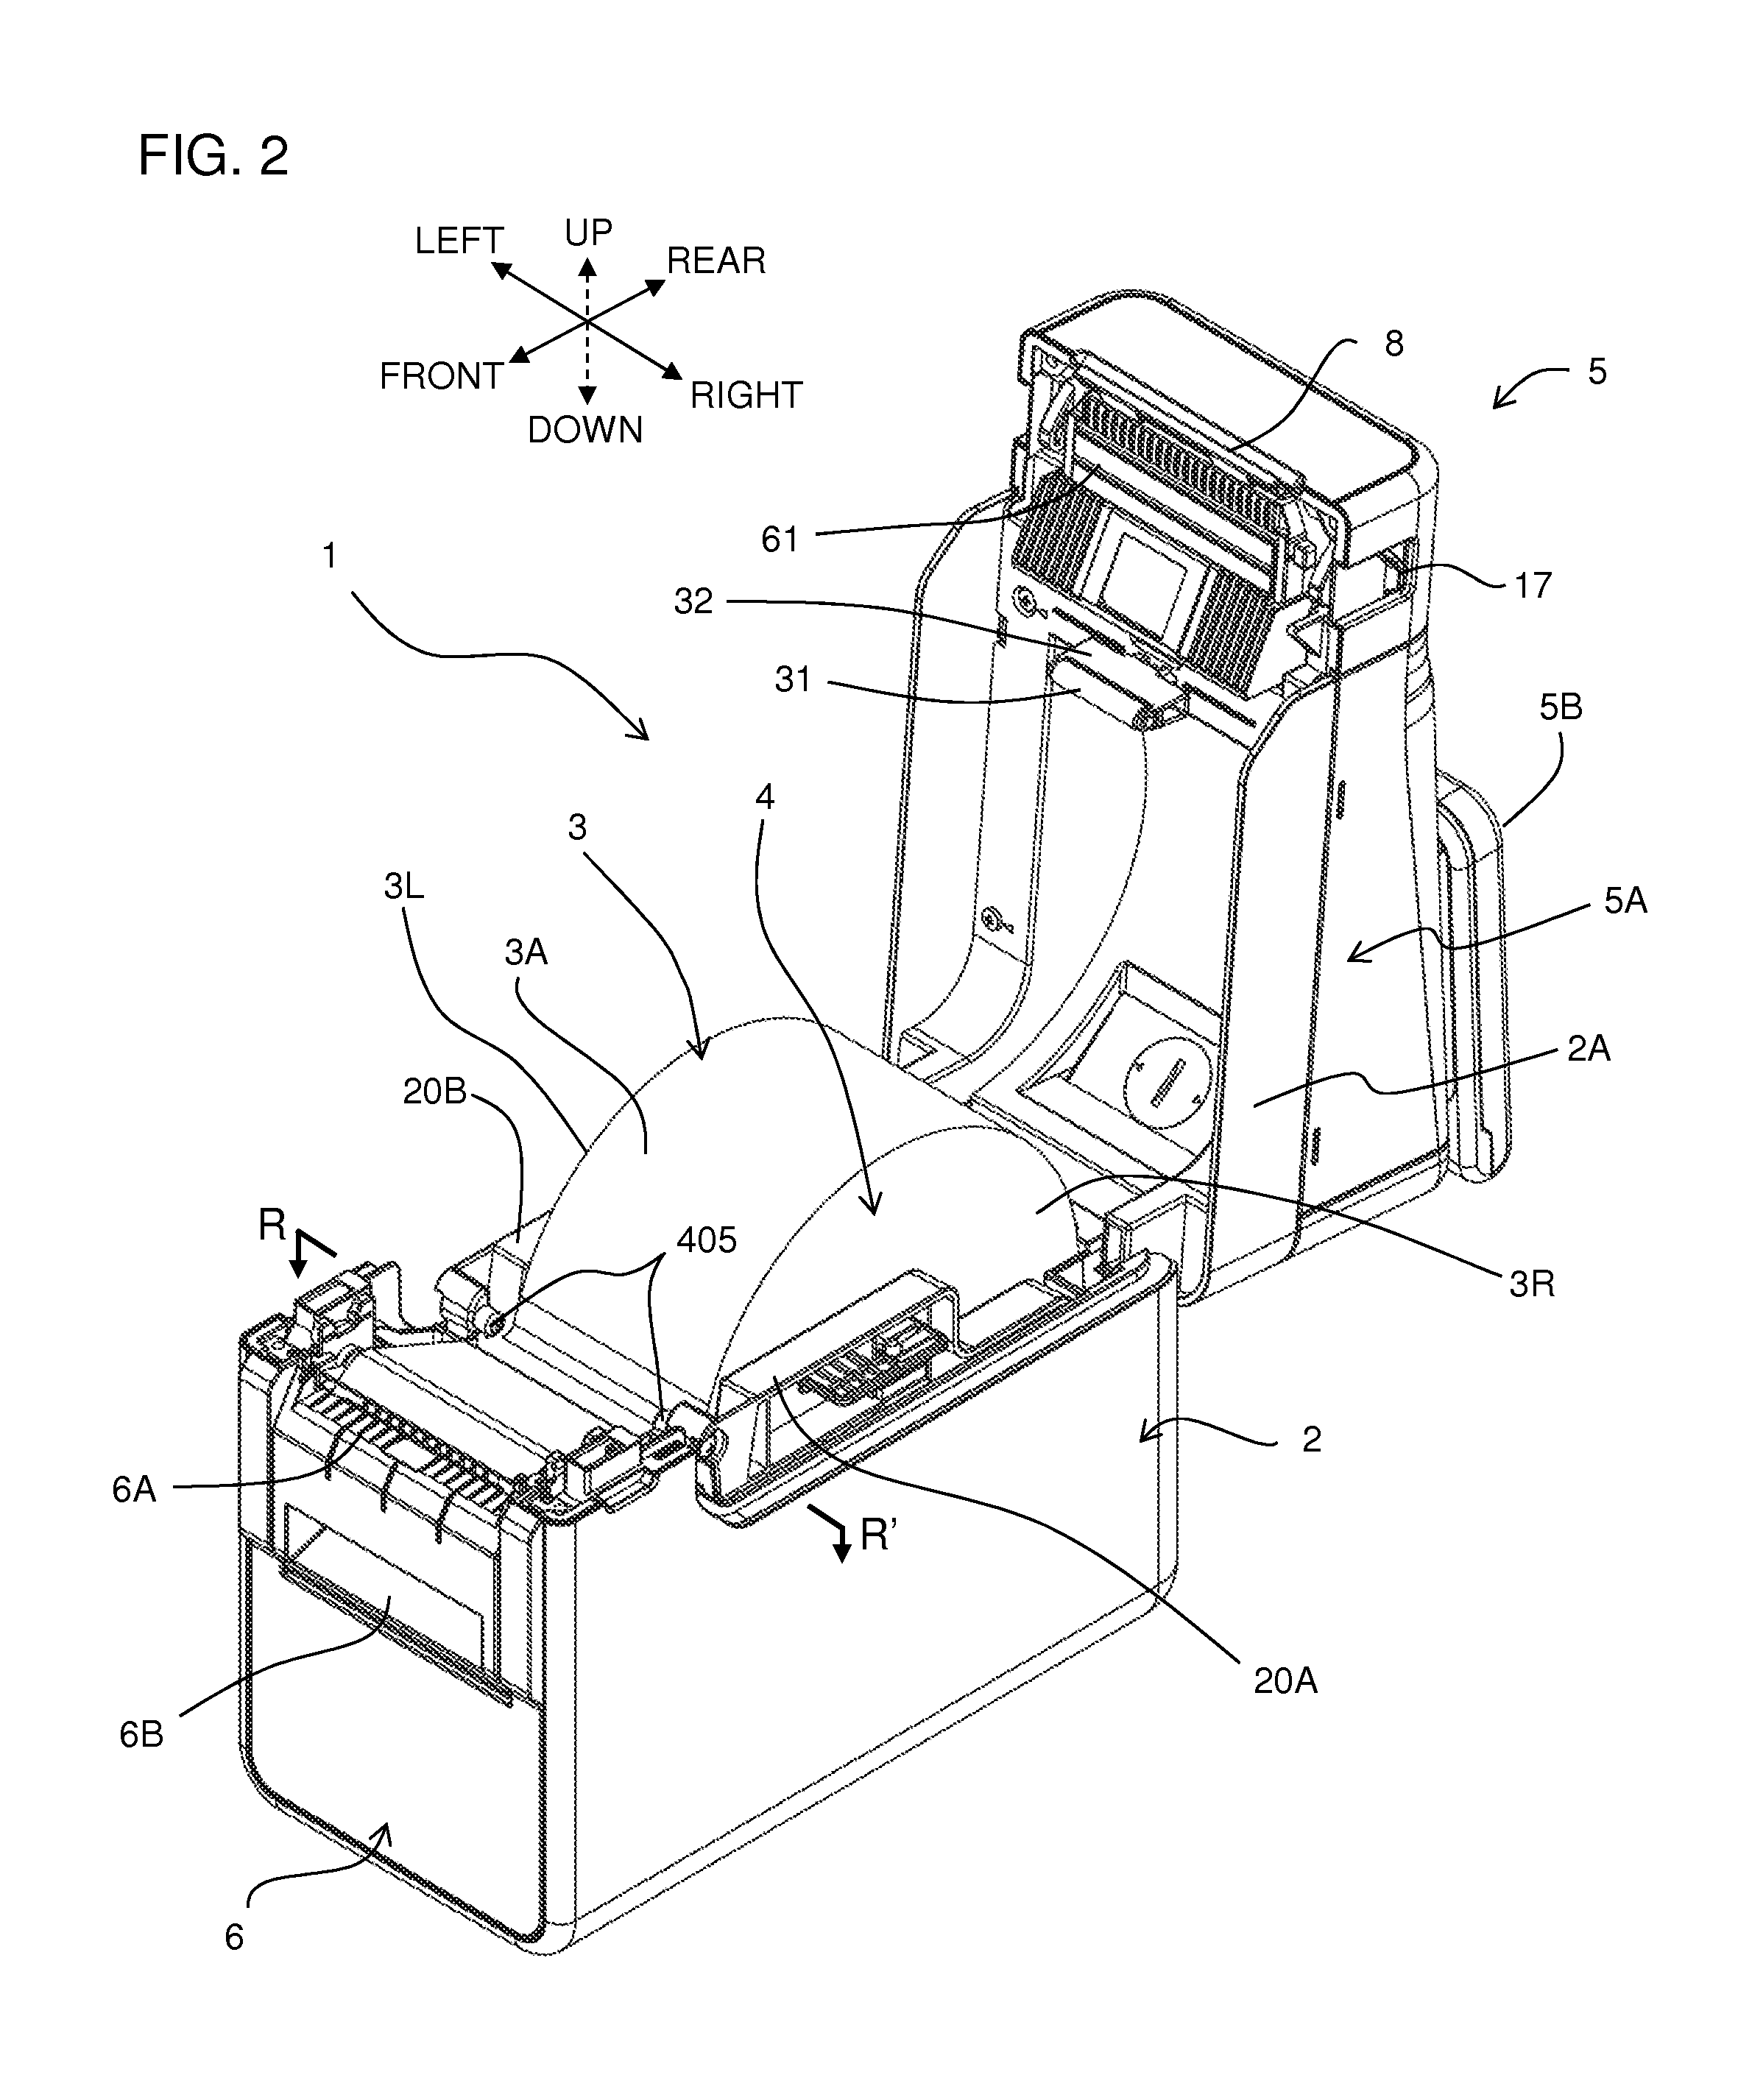 Printer with pair of tape roll guide members having a recessed part for housing a pressing roller